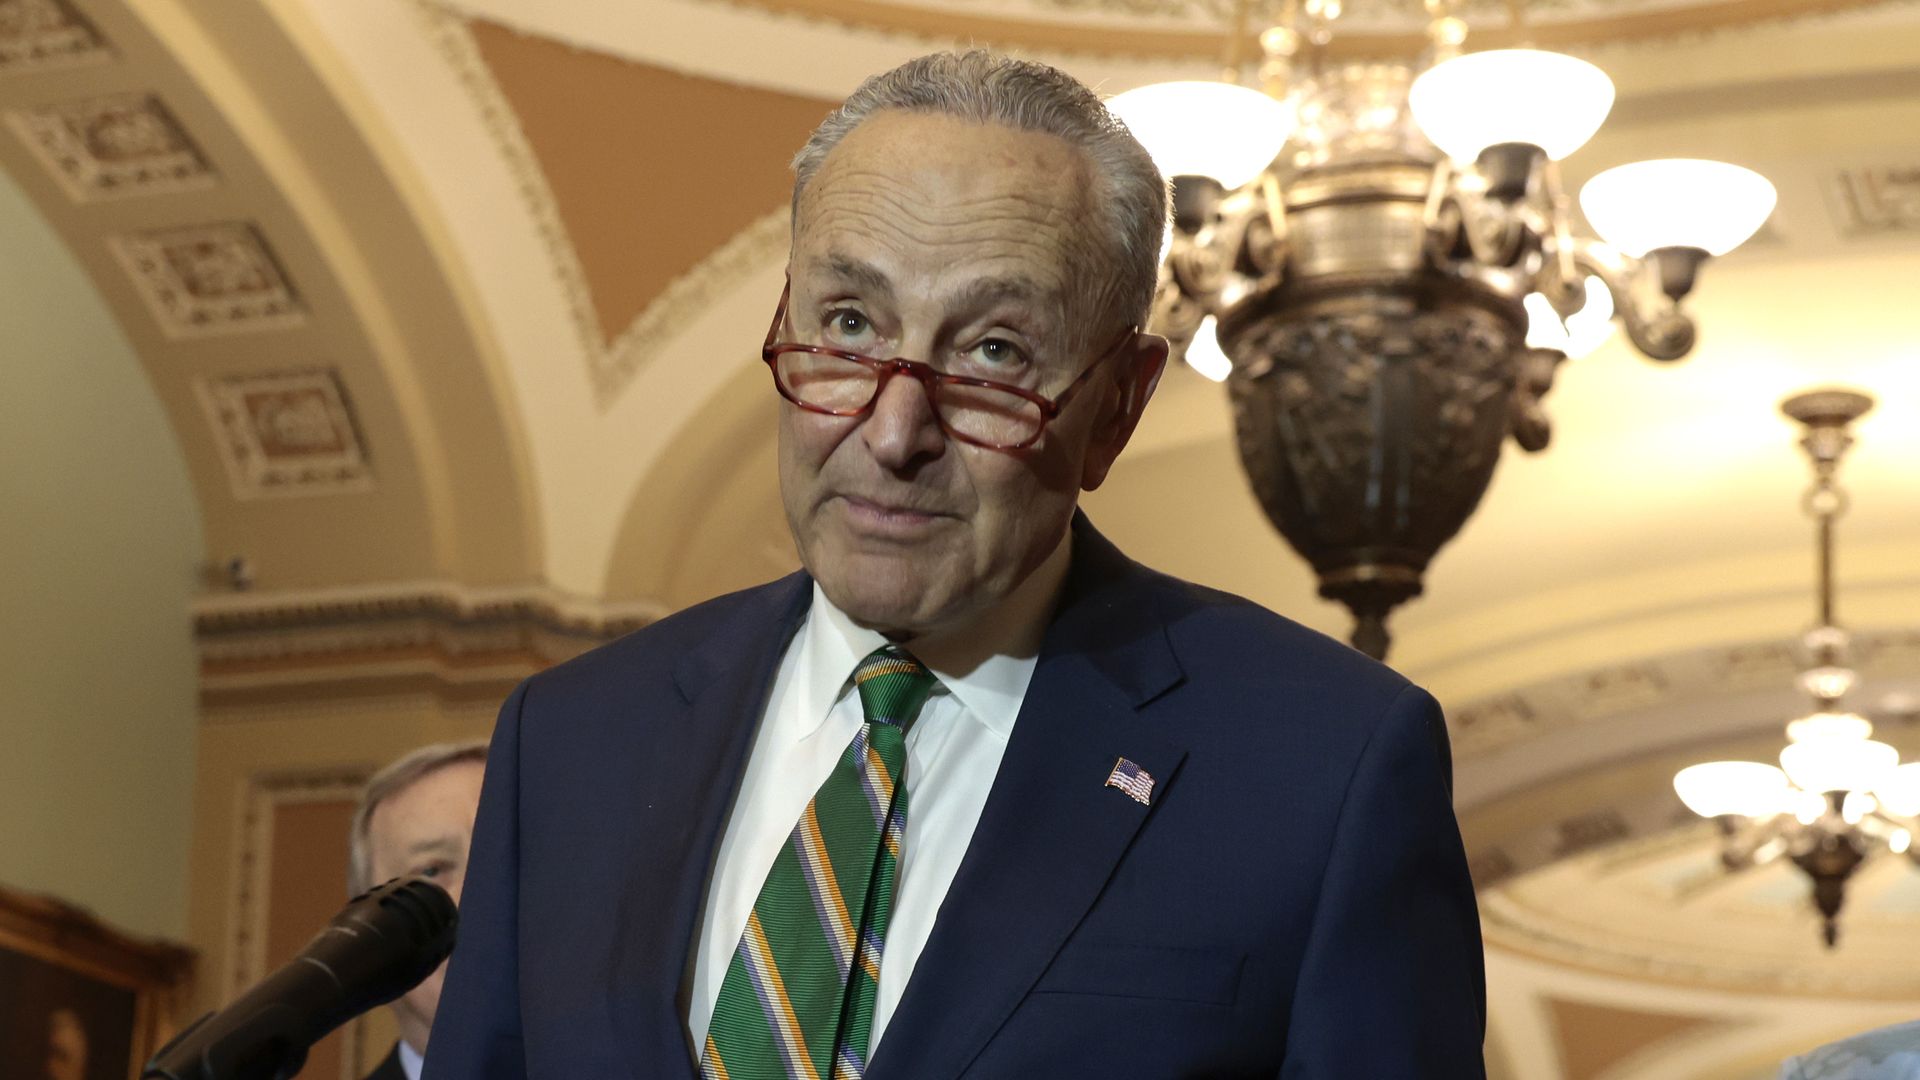 Senate Majority Leader Chuck Schumer (D-NY) speaks at a news conference on Capitol Hill on April 5.